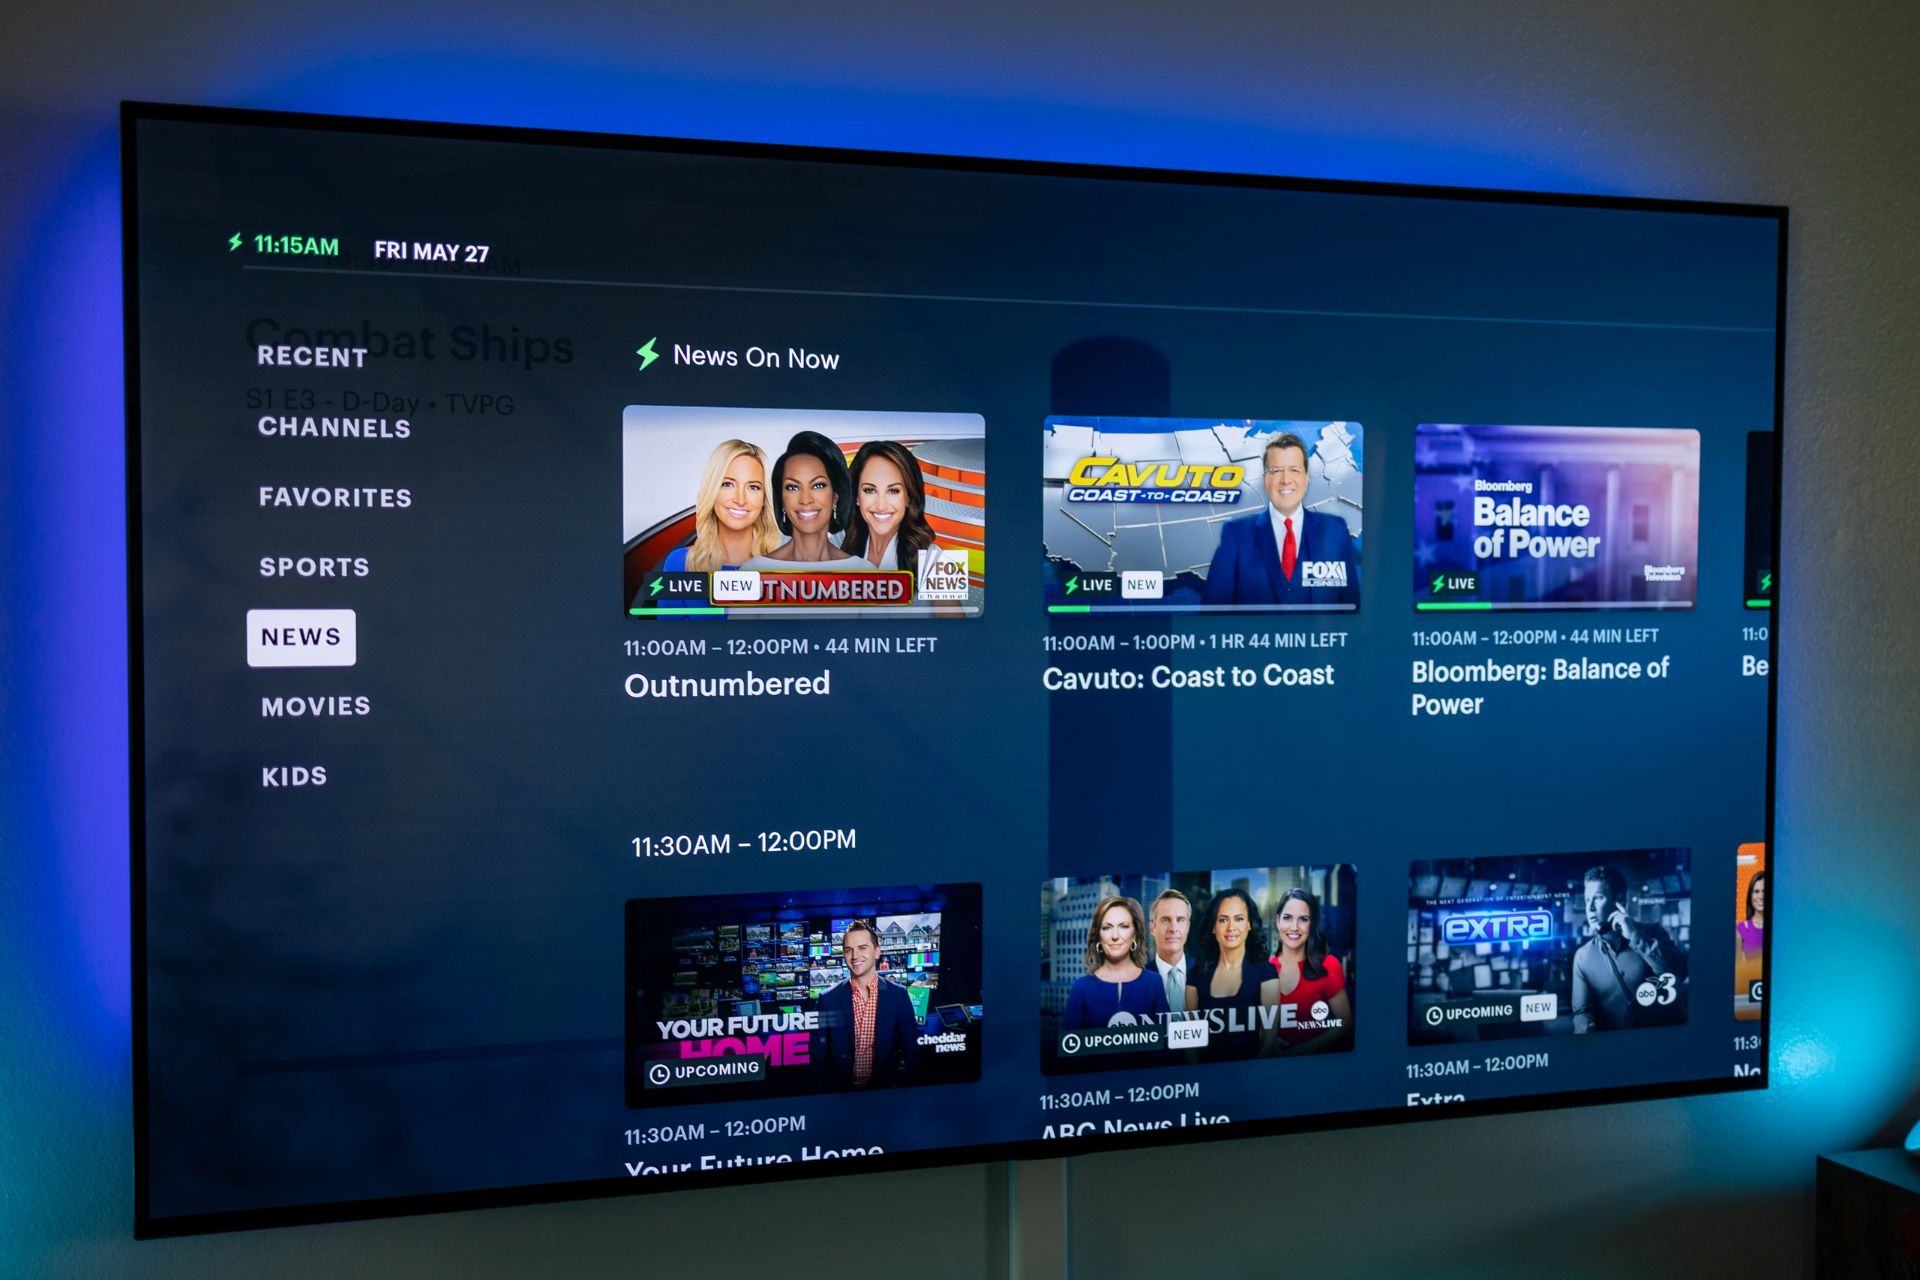 How To Access Hulu Live On Smart TV